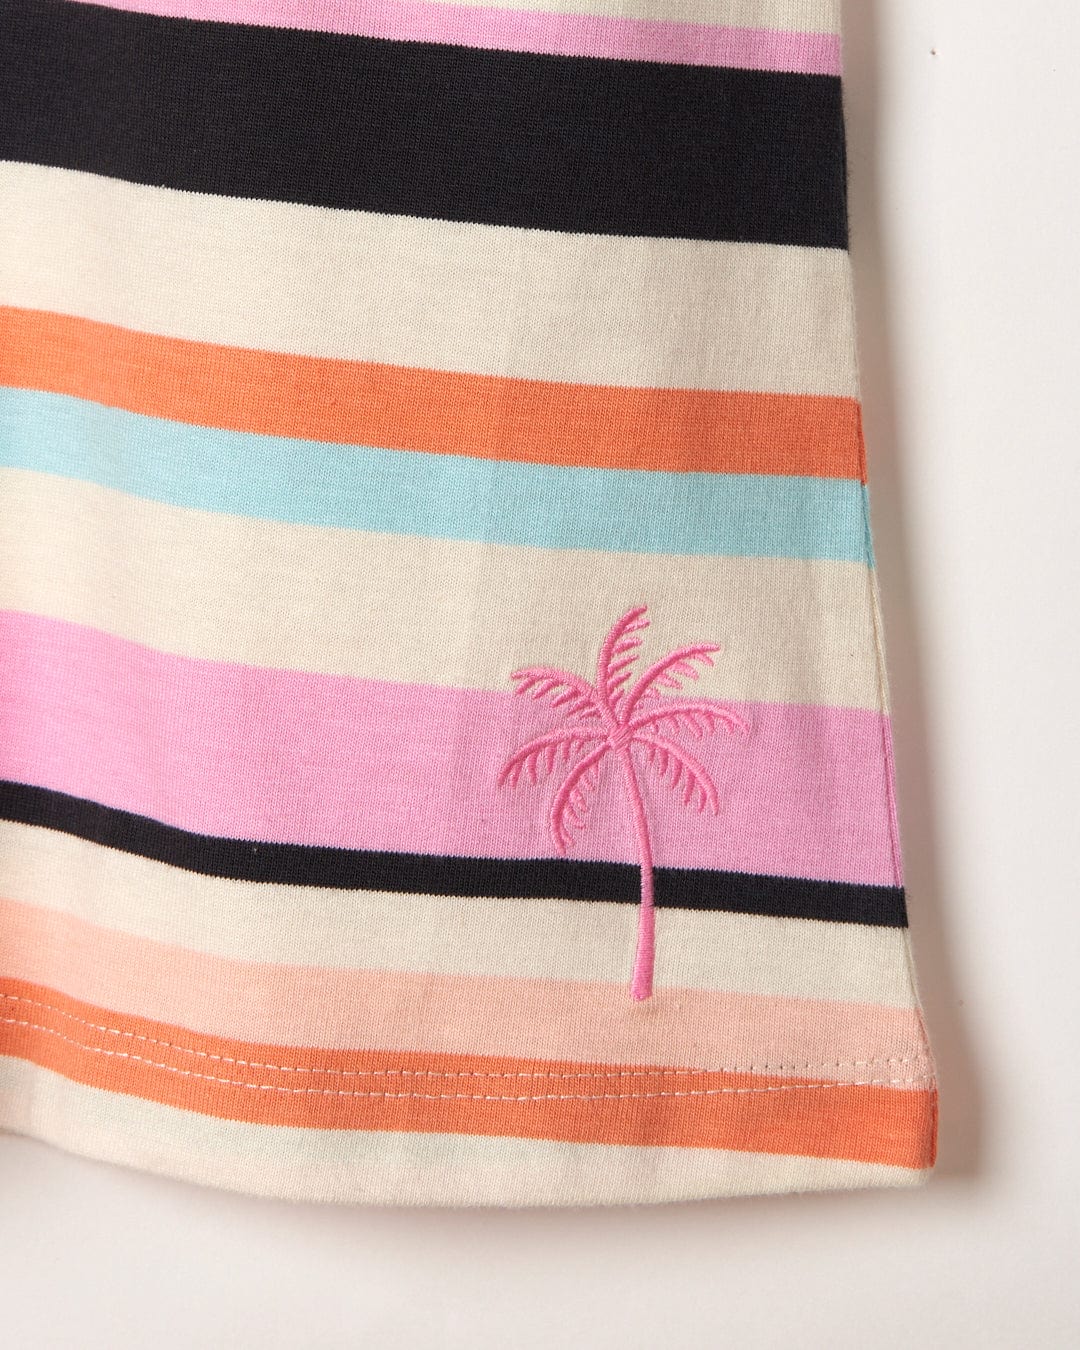 A Juno Bauhaus striped cotton skirt with a palm tree embroidered on it.